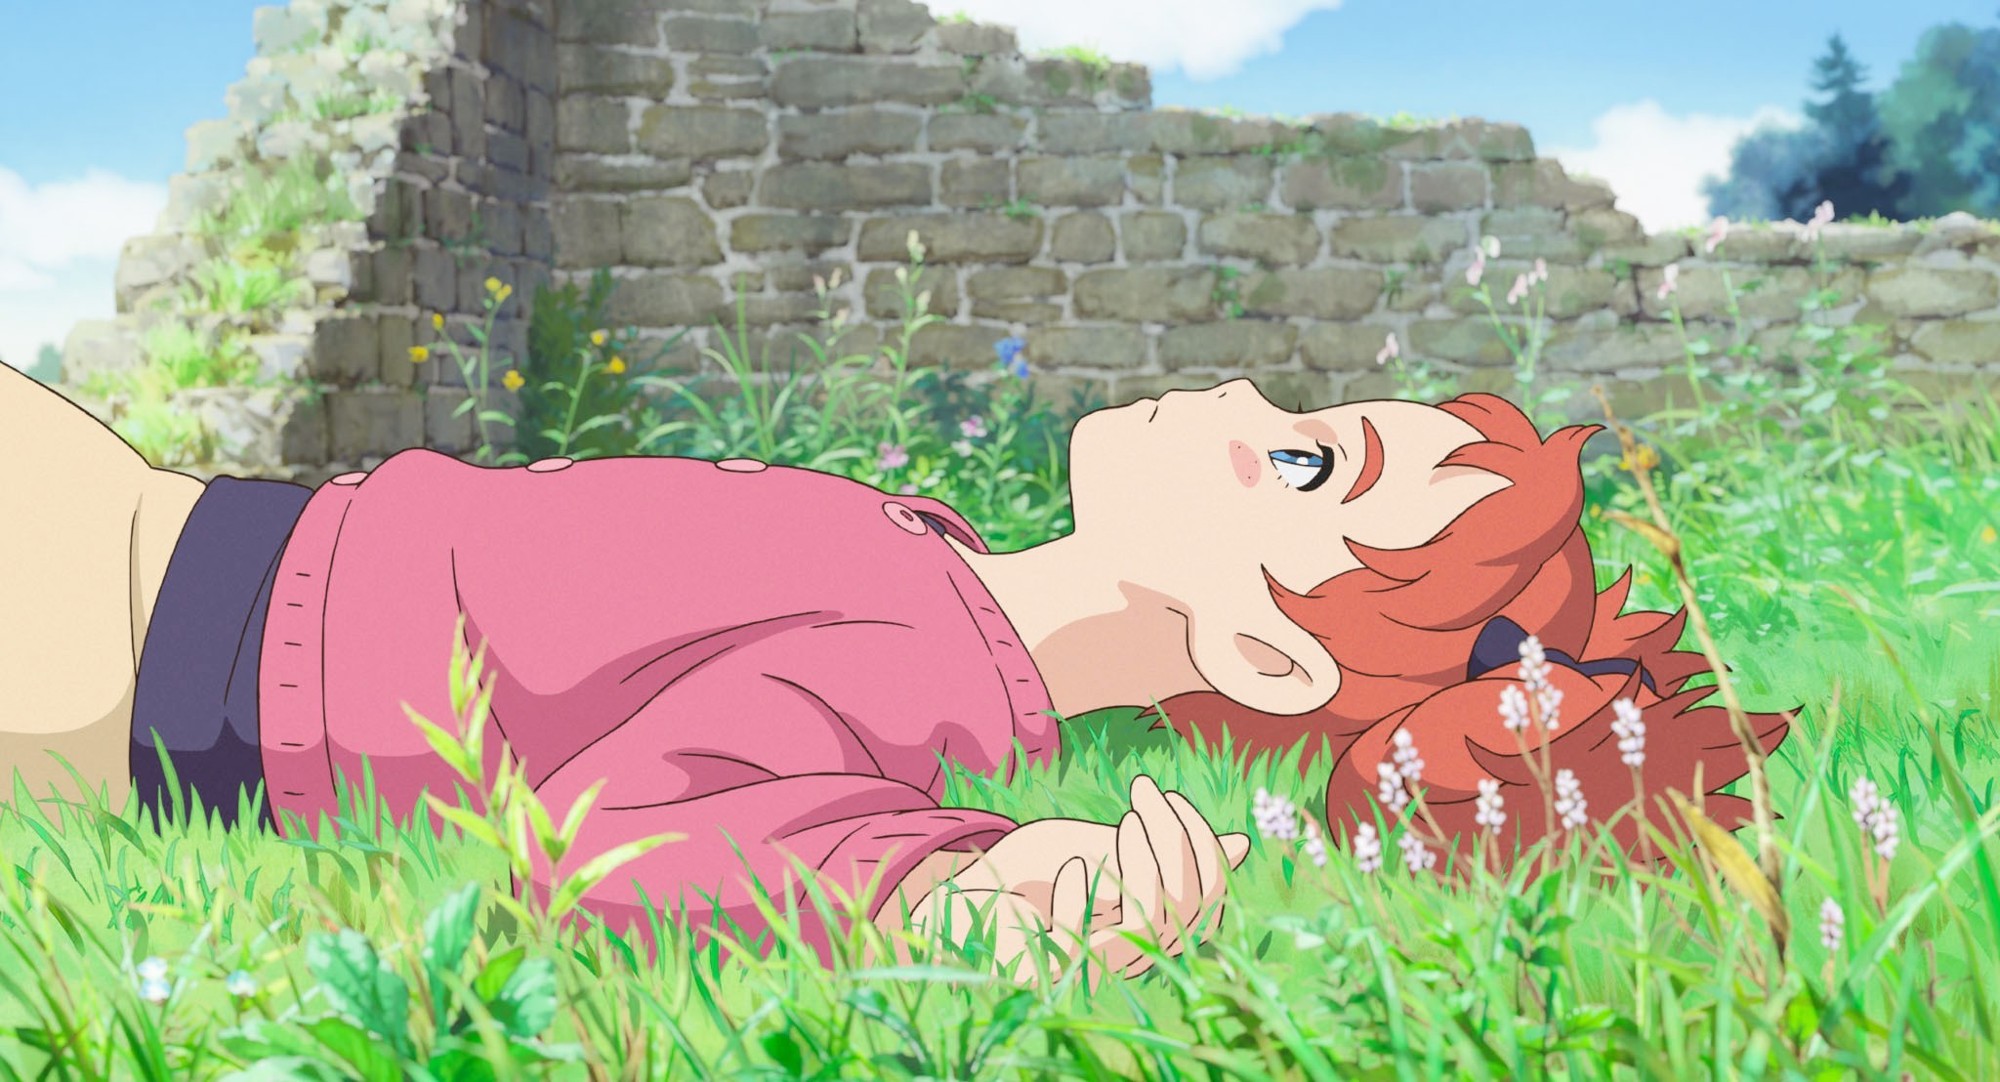 Mary from Gkids' Mary and the Witch's Flower (2018)